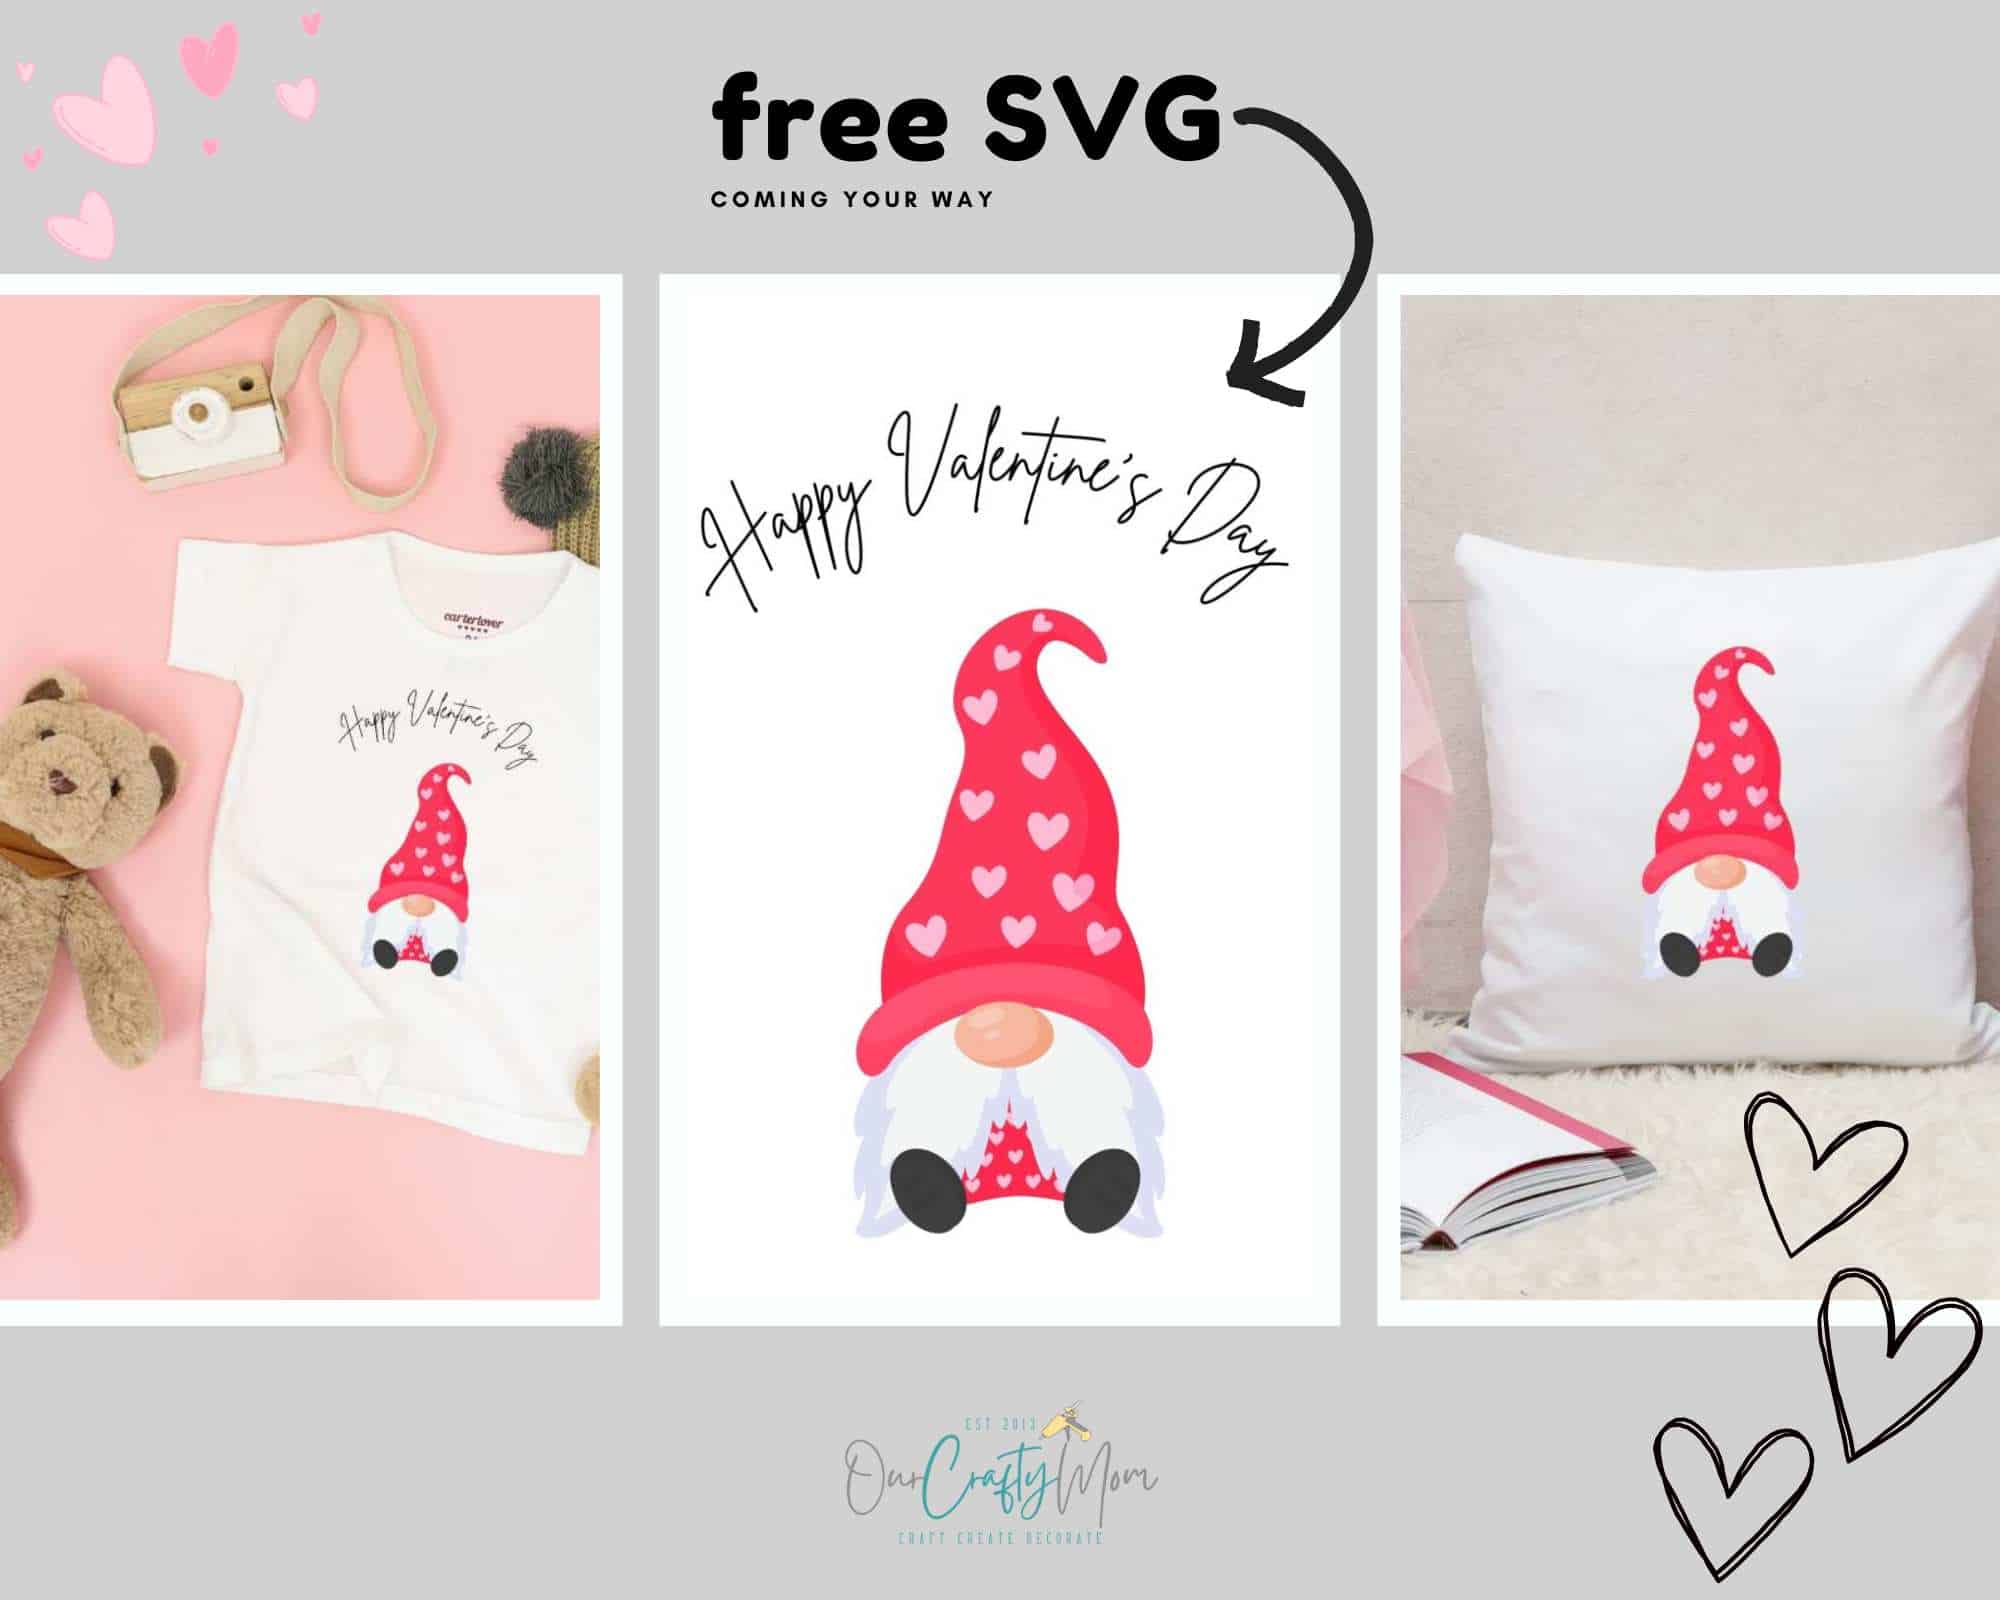 Valentine Gnome SVG: Spread love with this cute and whimsical Valentine's Day gnome design. Download the free digital files today!